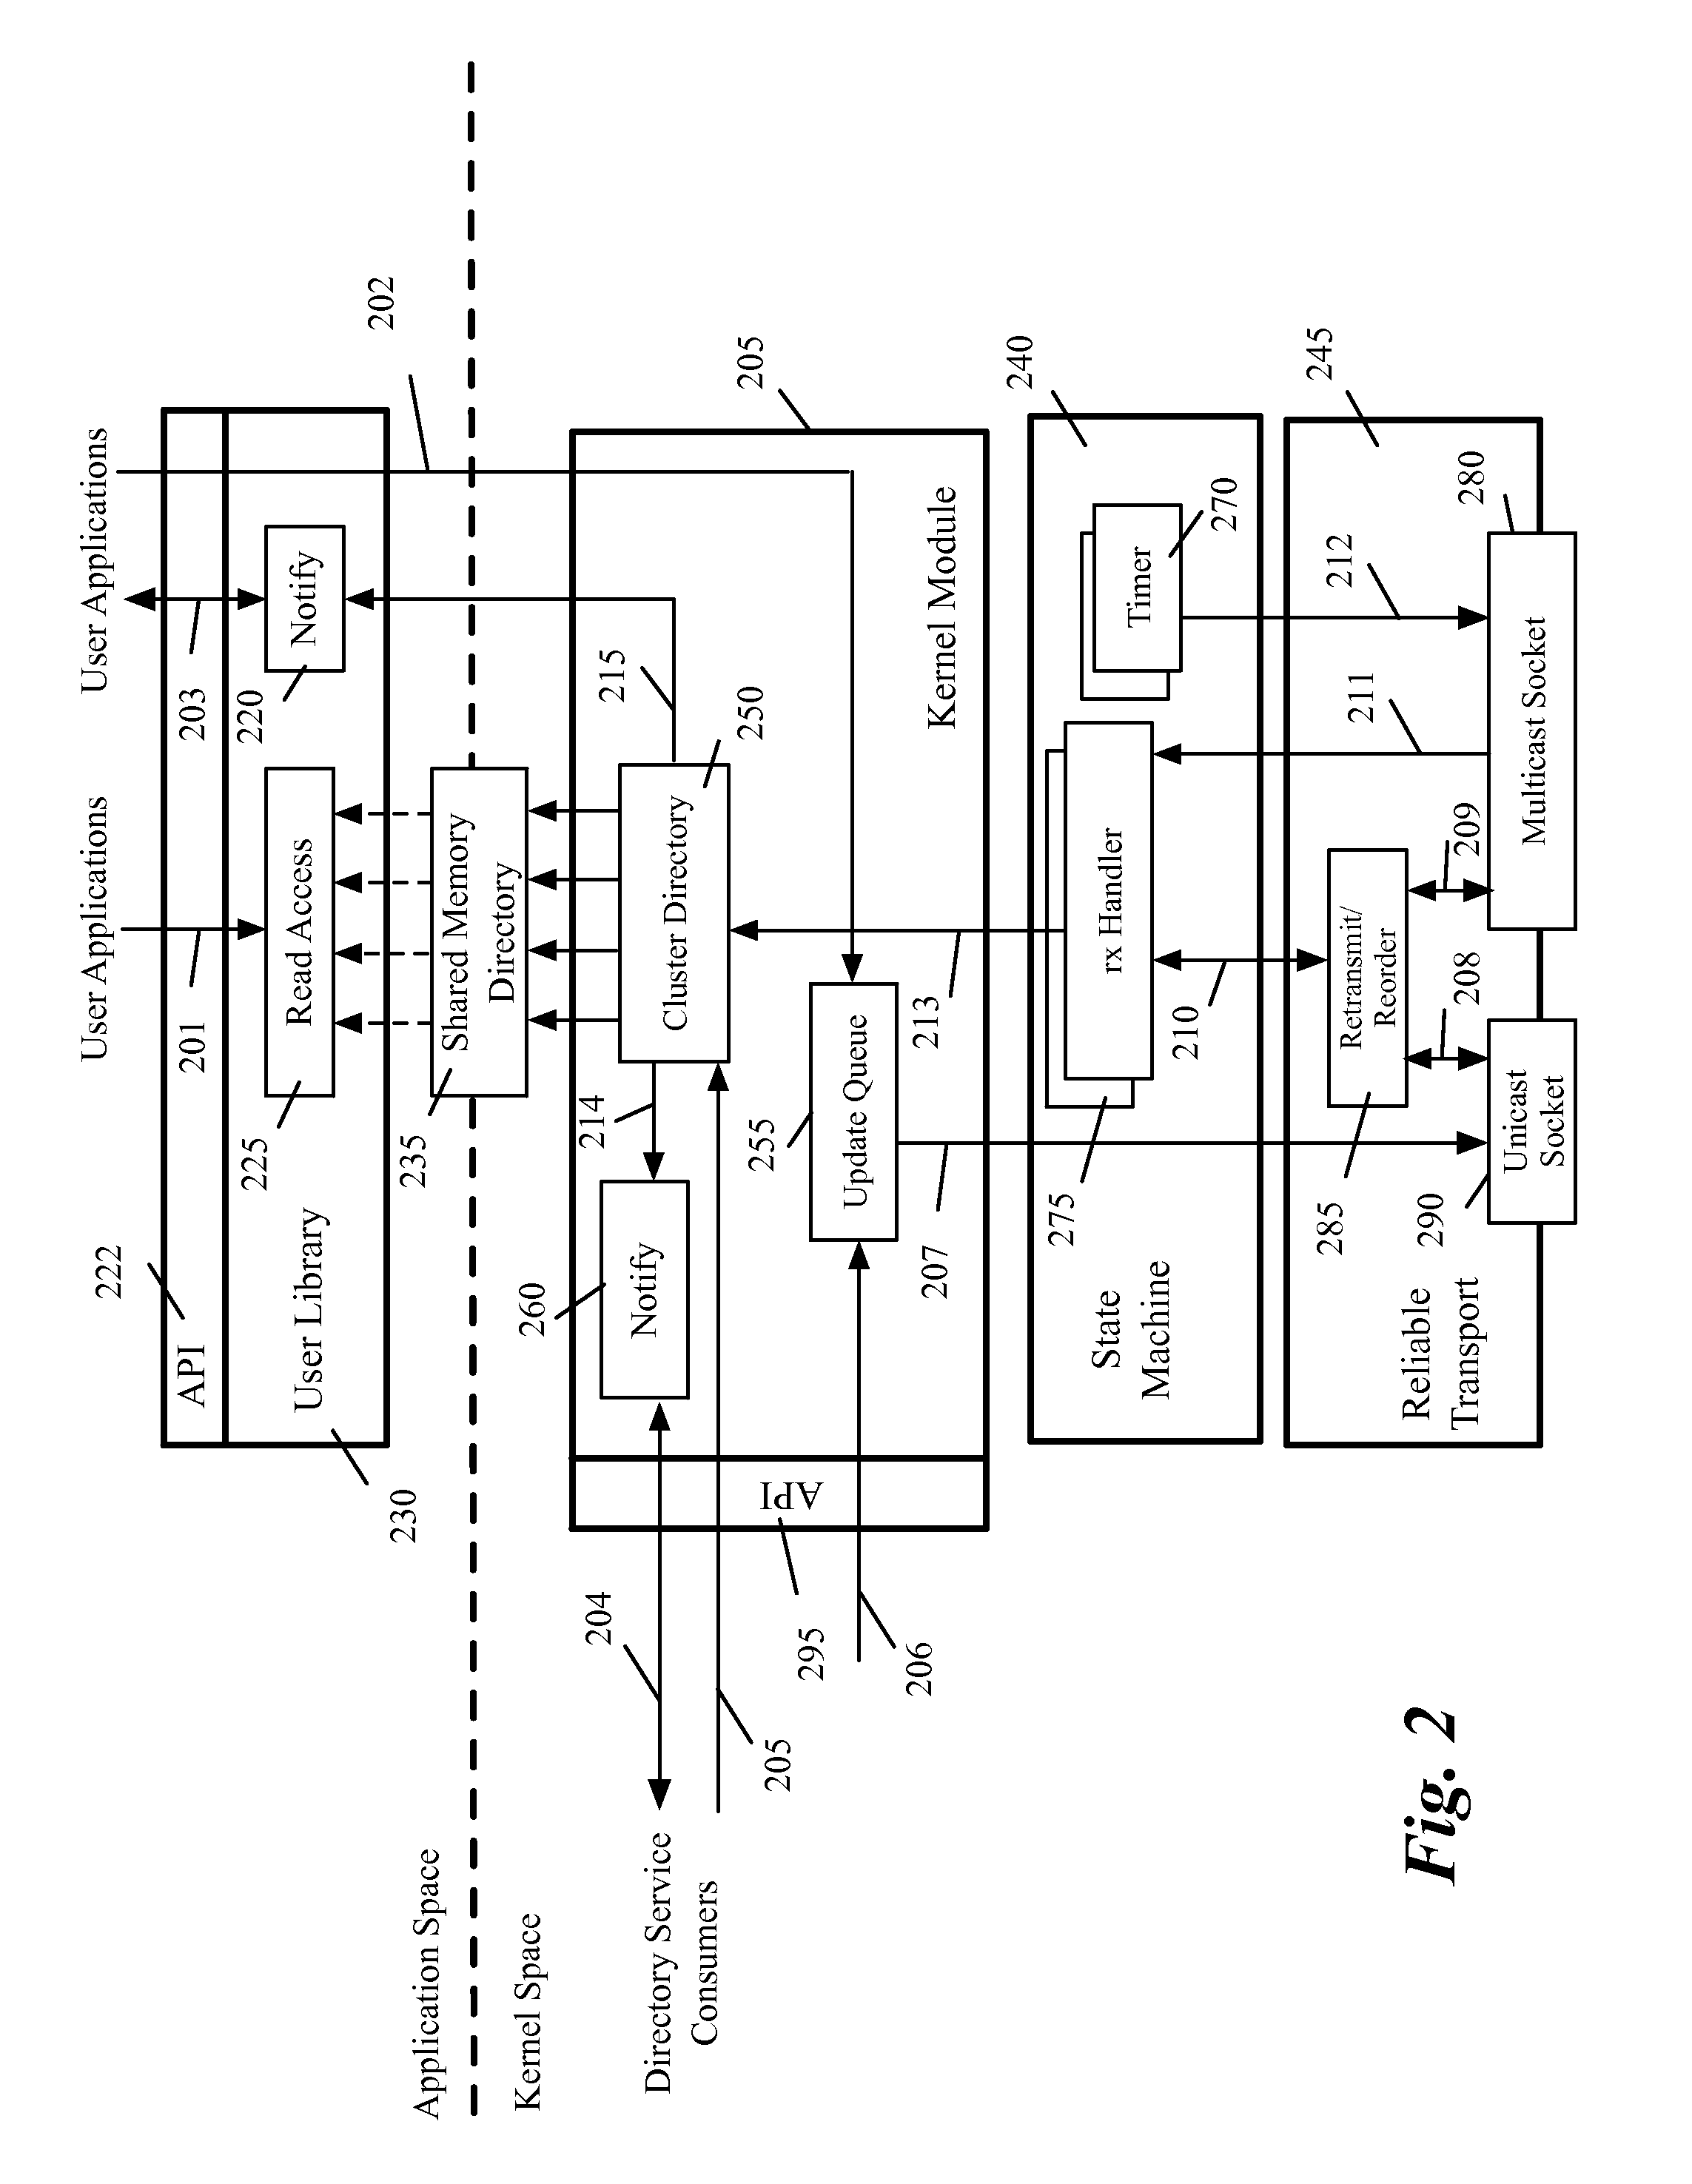 Optimized message retransmission mechanism for distributed storage virtualization directory system